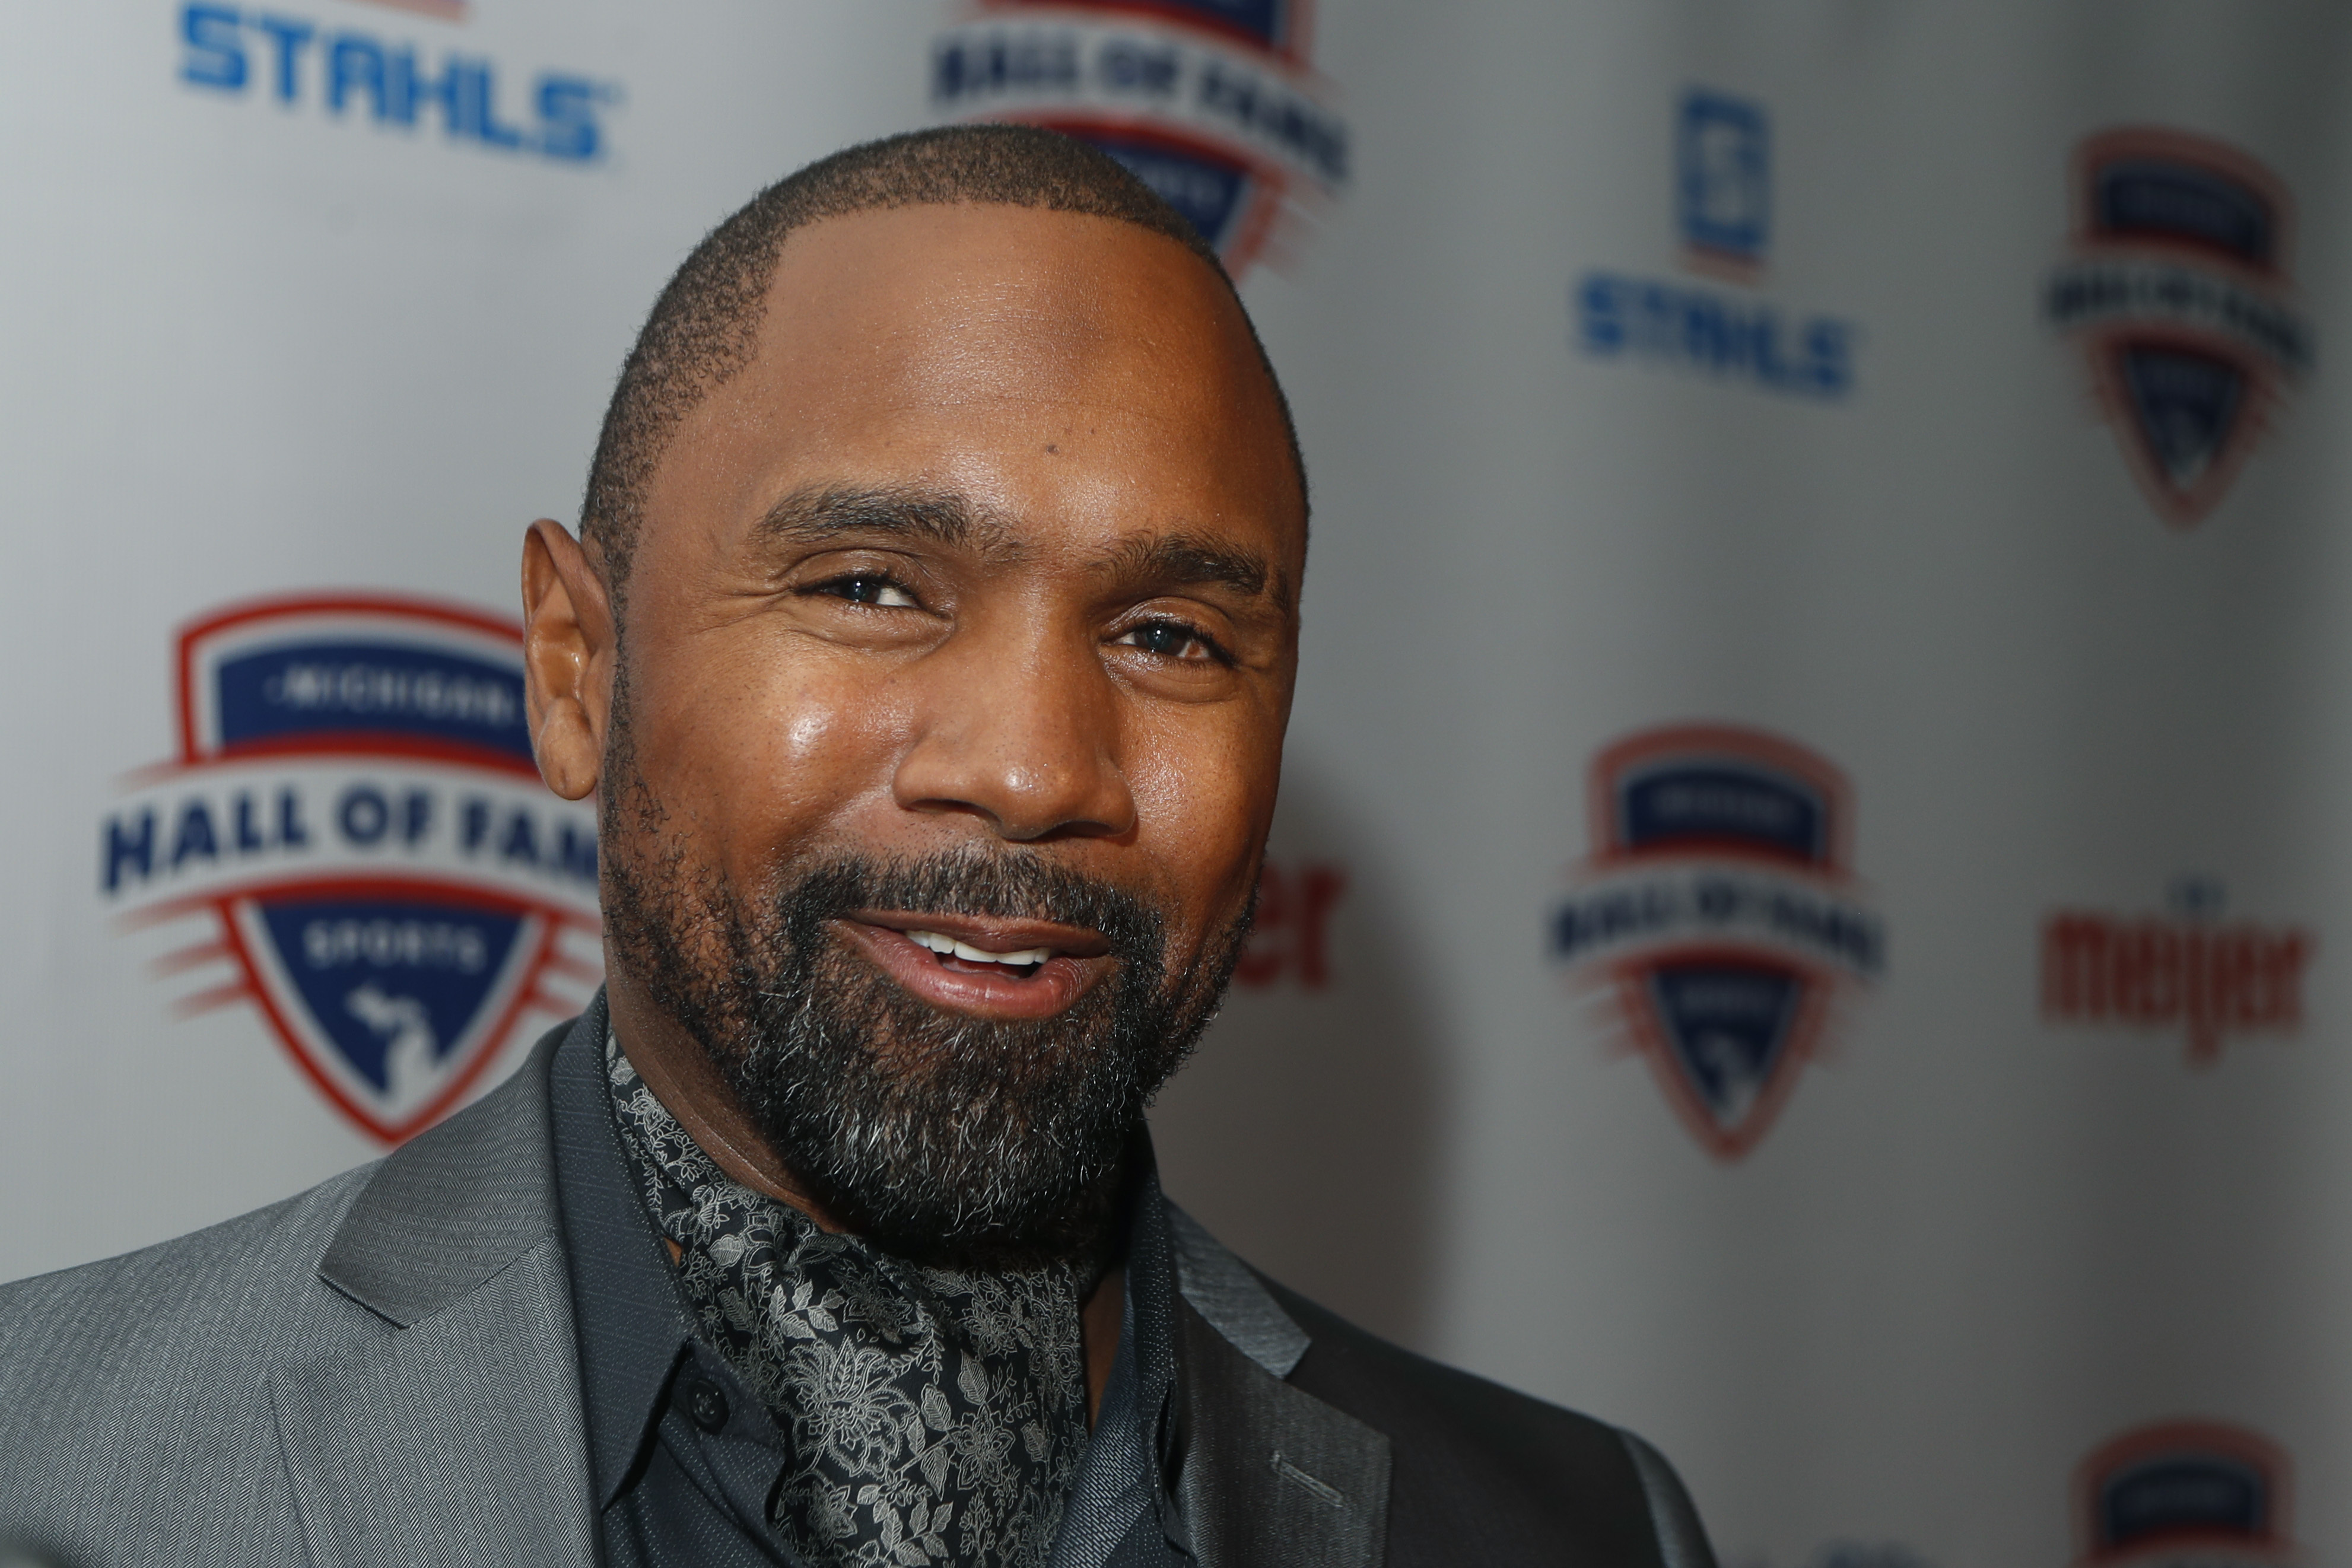 Charles Woodson to be inducted into Pro Football Hall of Fame